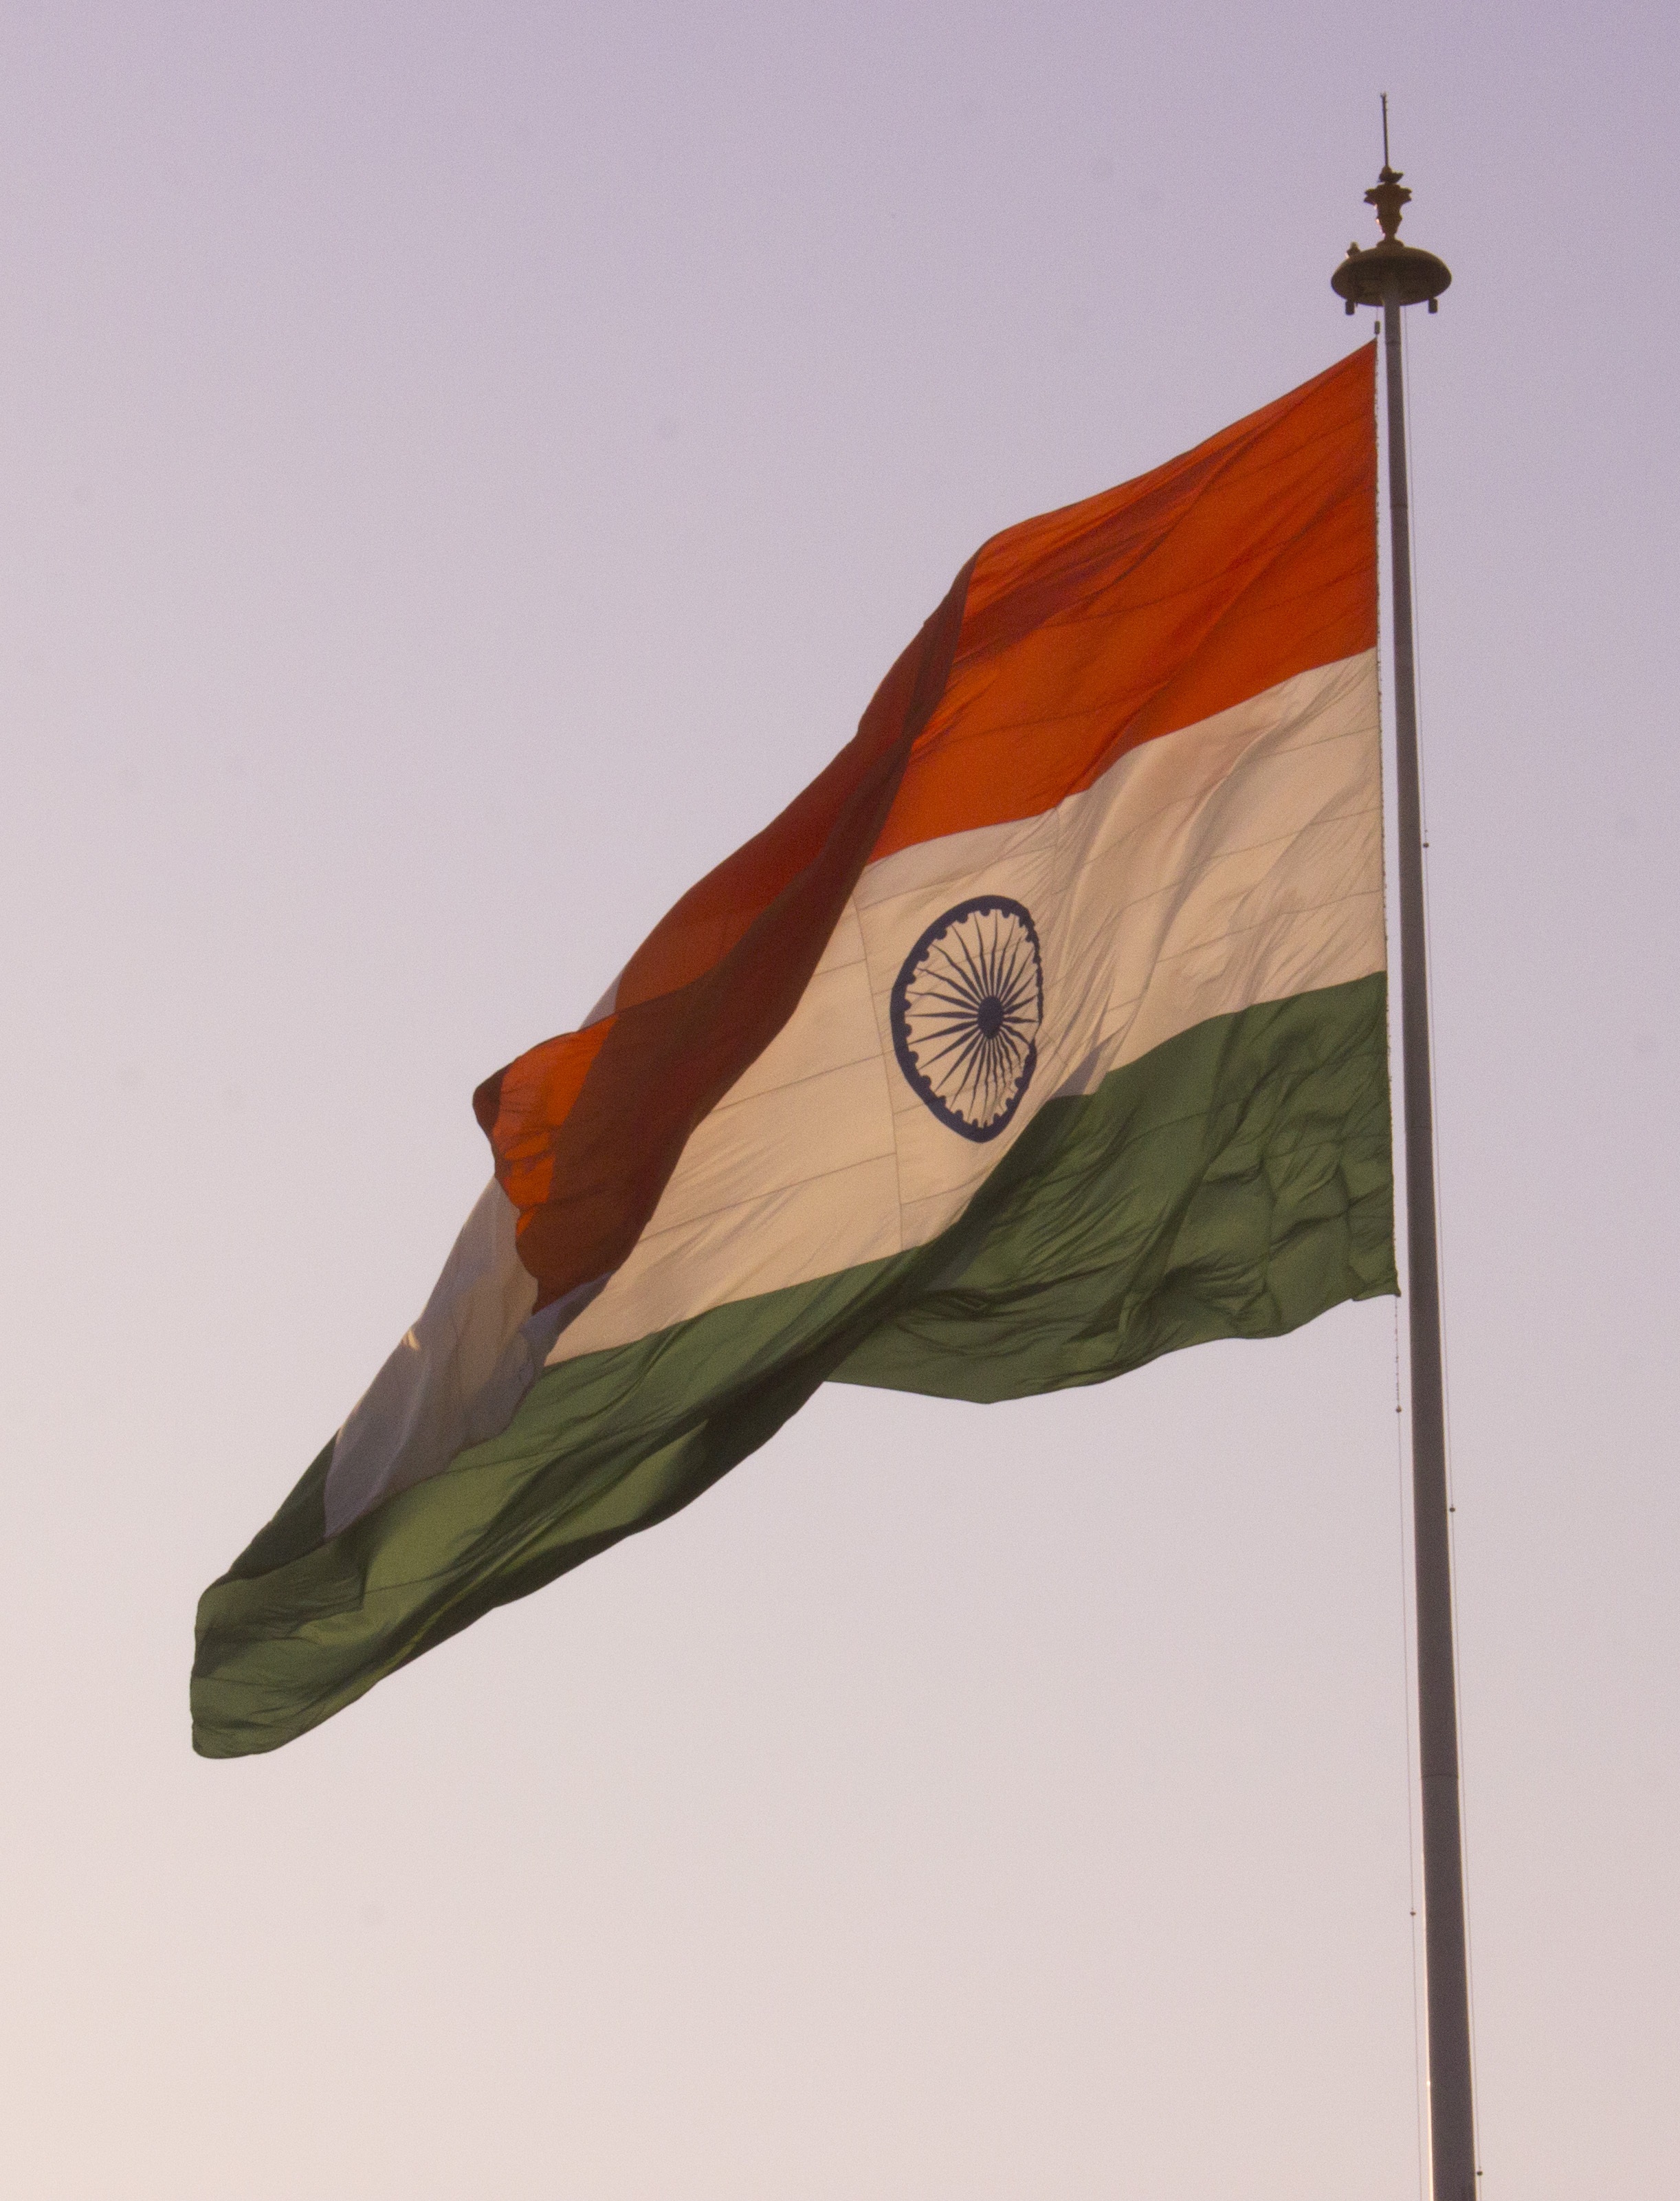 Free Image, wing, white, wheel, wind, country, green, color, peace, holiday, freedom, independence day, national flag, honor, poster, heritage, government, tricolor, saffron, nation, patriotic, democracy, nationality, nationalism, constitution